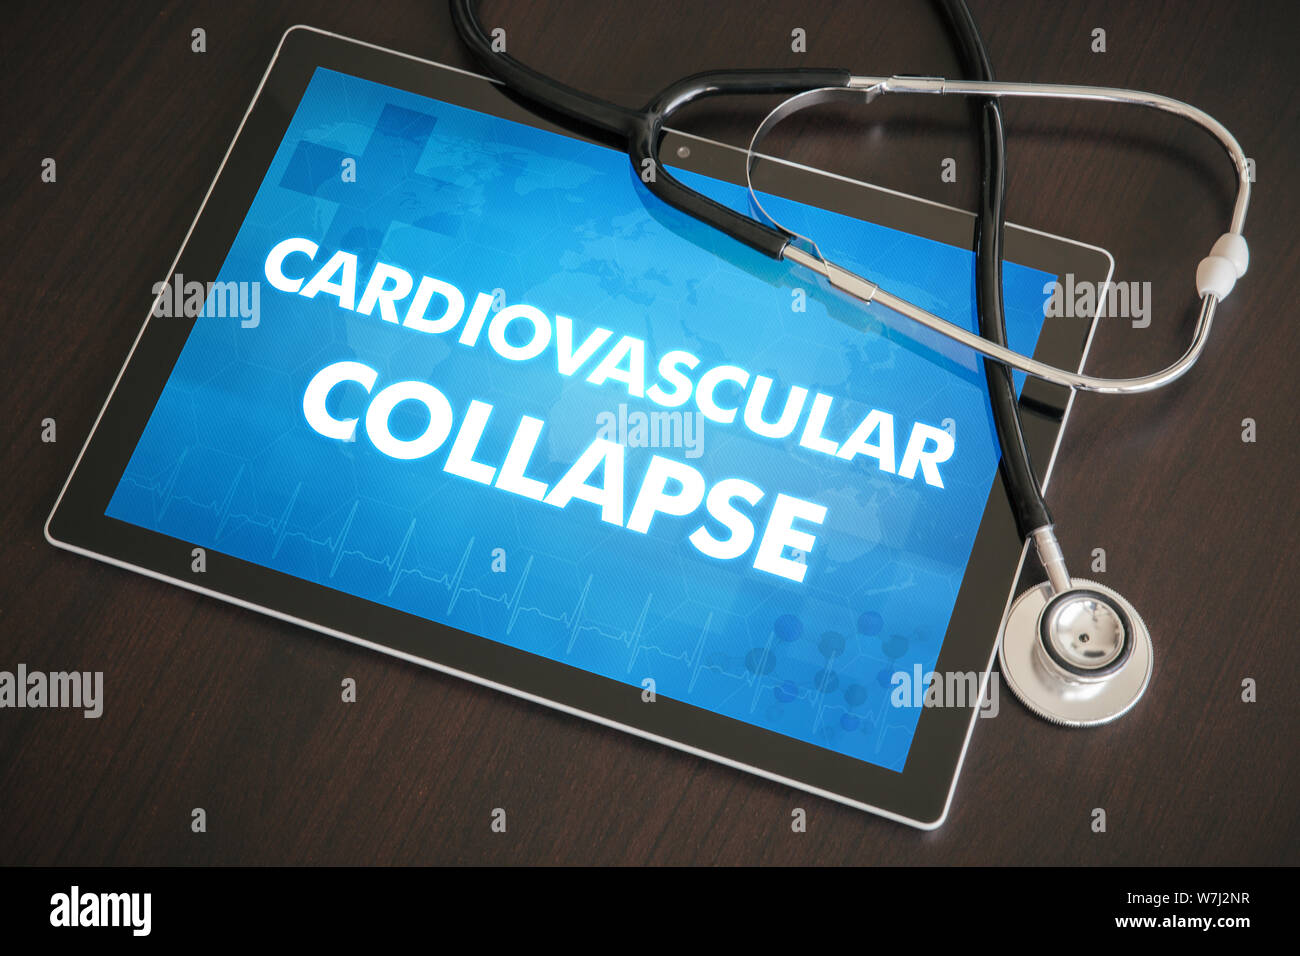 Cardiovascular collapse (endocrine disease) diagnosis medical concept on tablet screen with stethoscope. Stock Photo